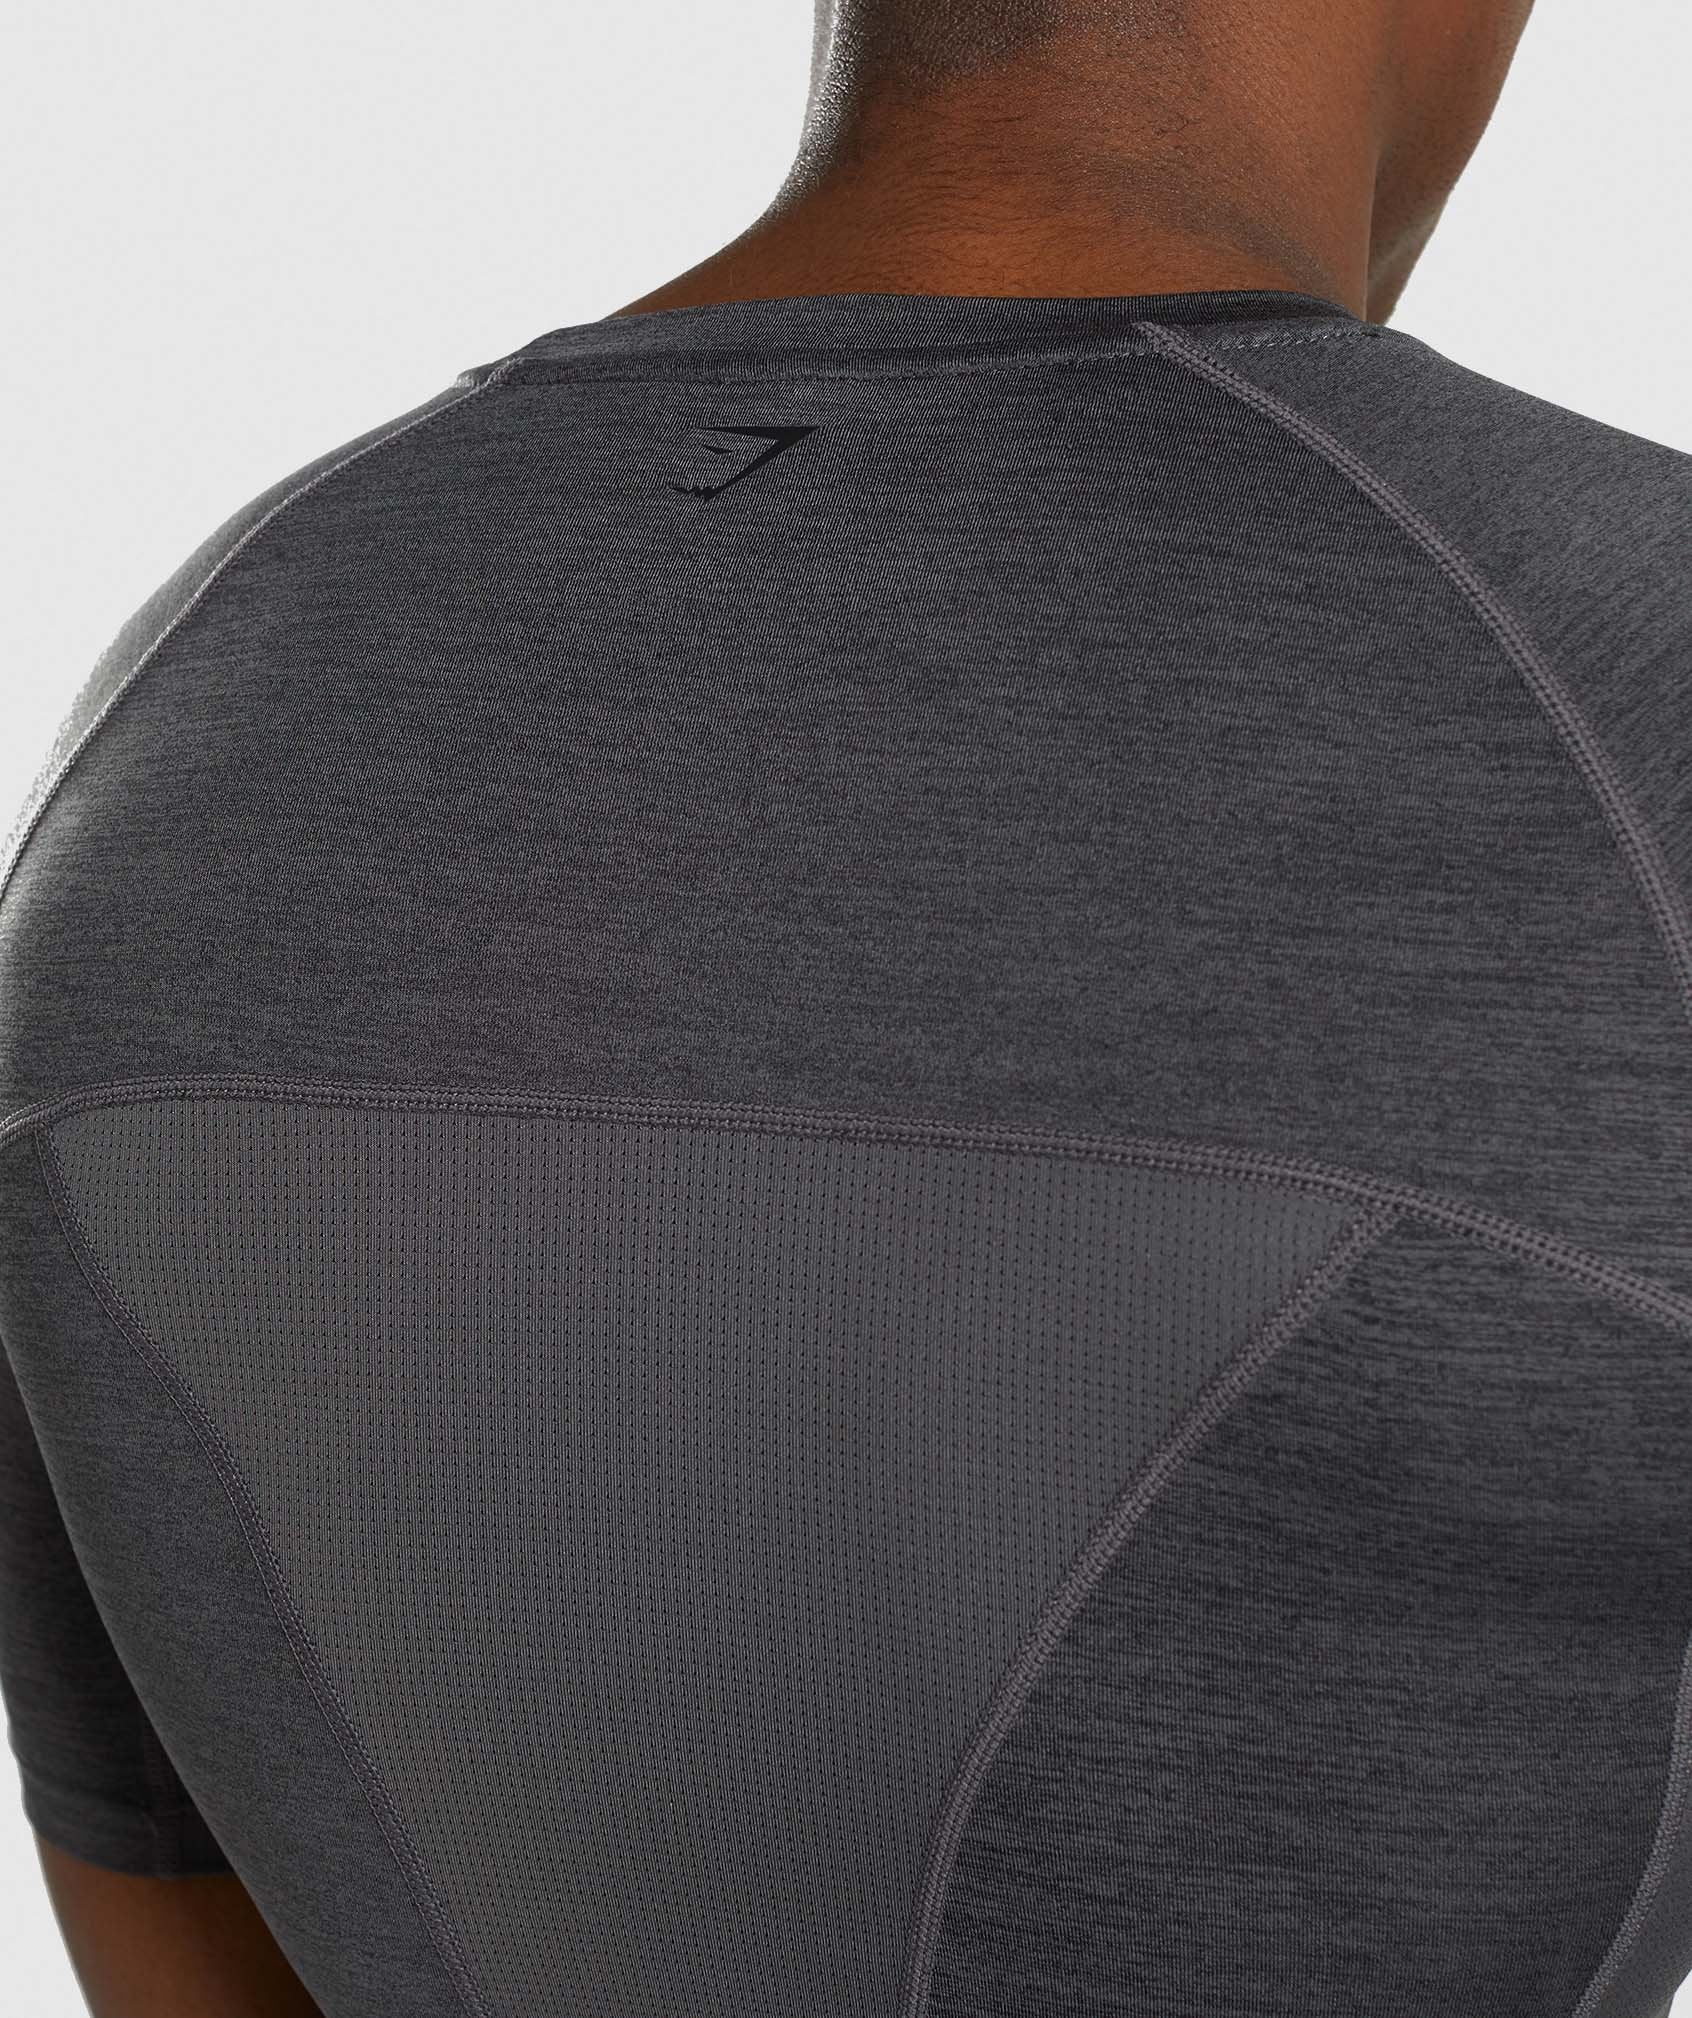 Element+ Baselayer T-Shirt in Black Marl - view 6